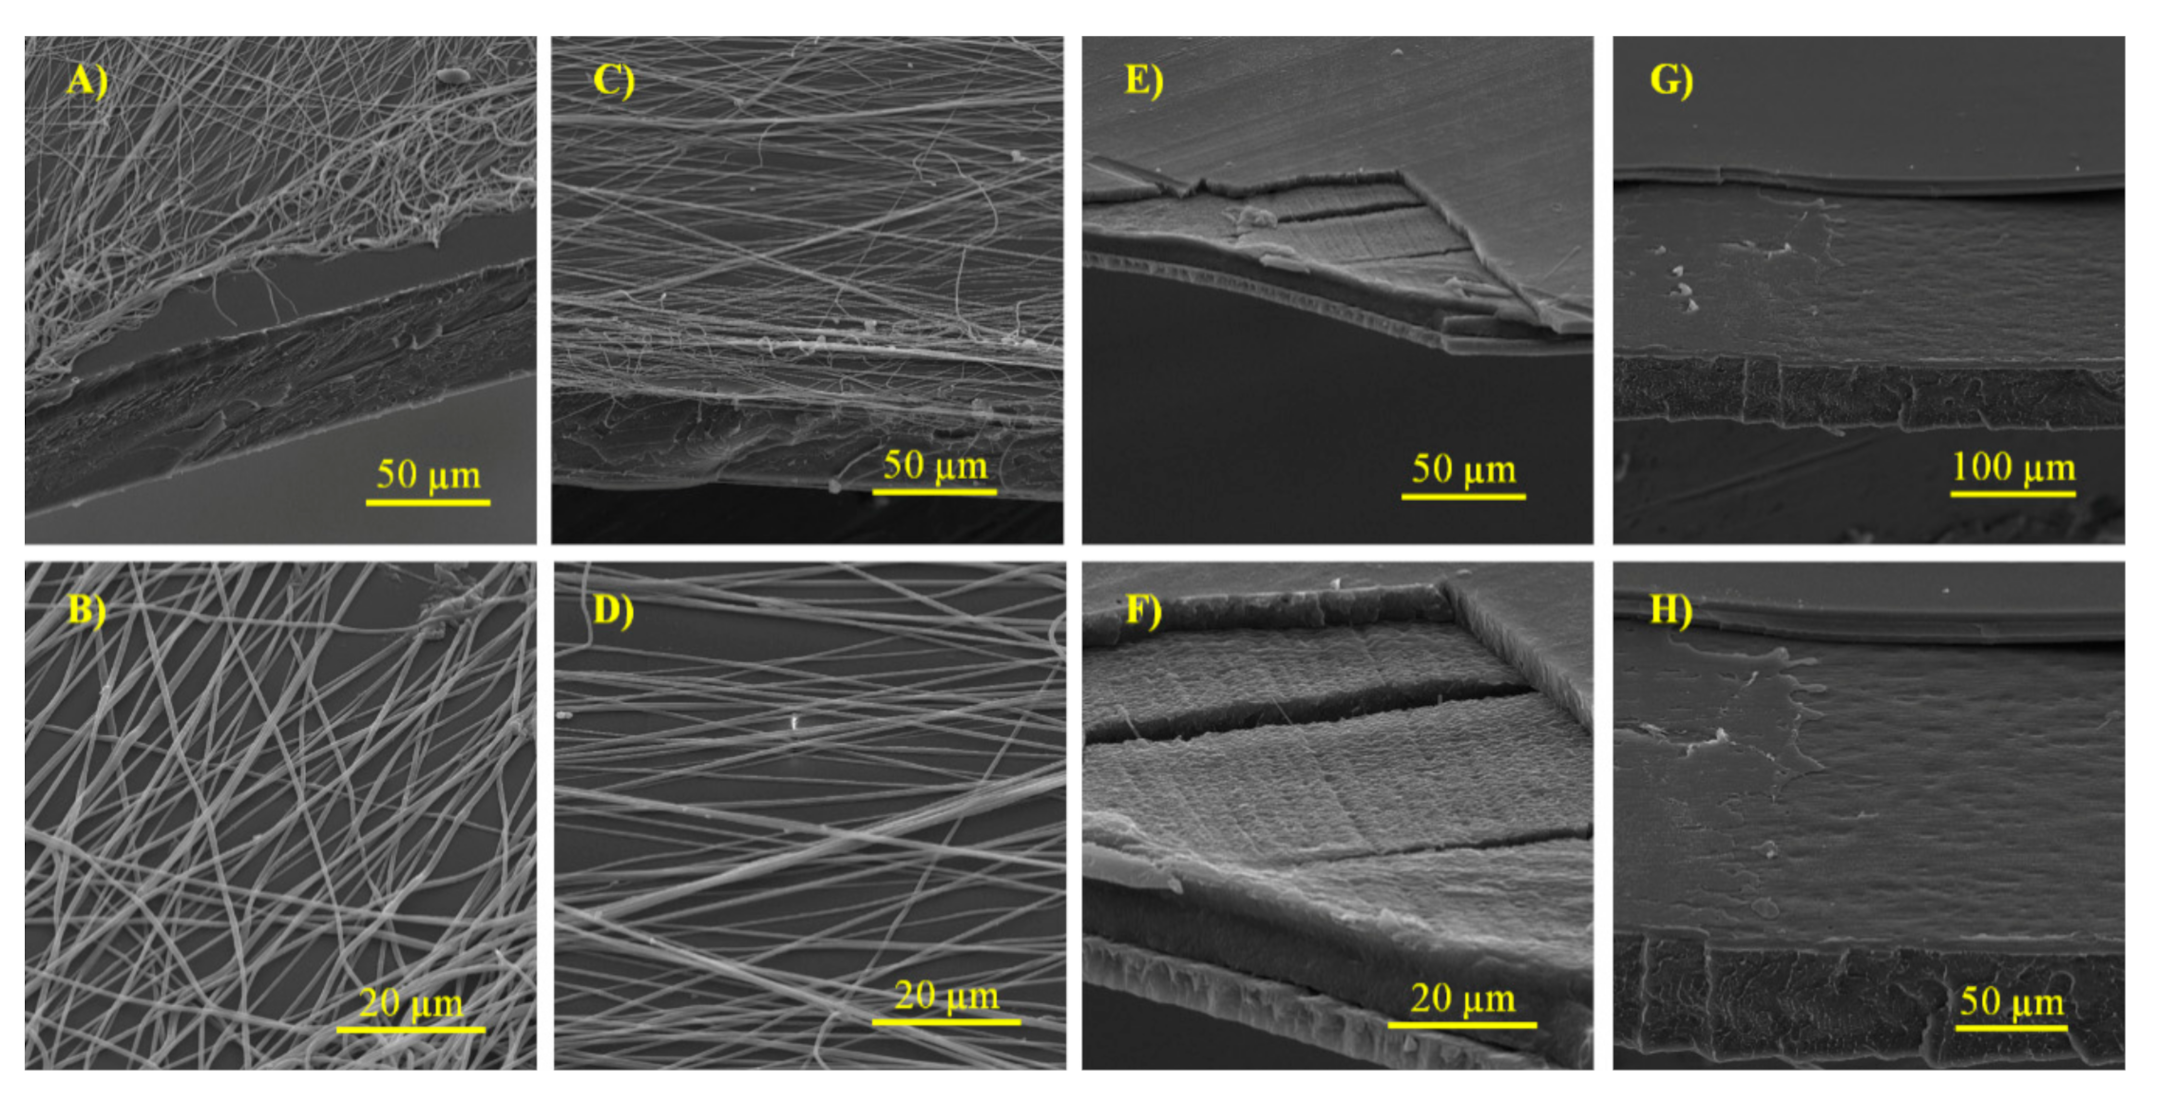 Polymers Free Full Text Designing Biodegradable And Active Multilayer System By Assembling An Electrospun Polycaprolactone Mat Containing Quercetin And Nanocellulose Between Polylactic Acid Films Html